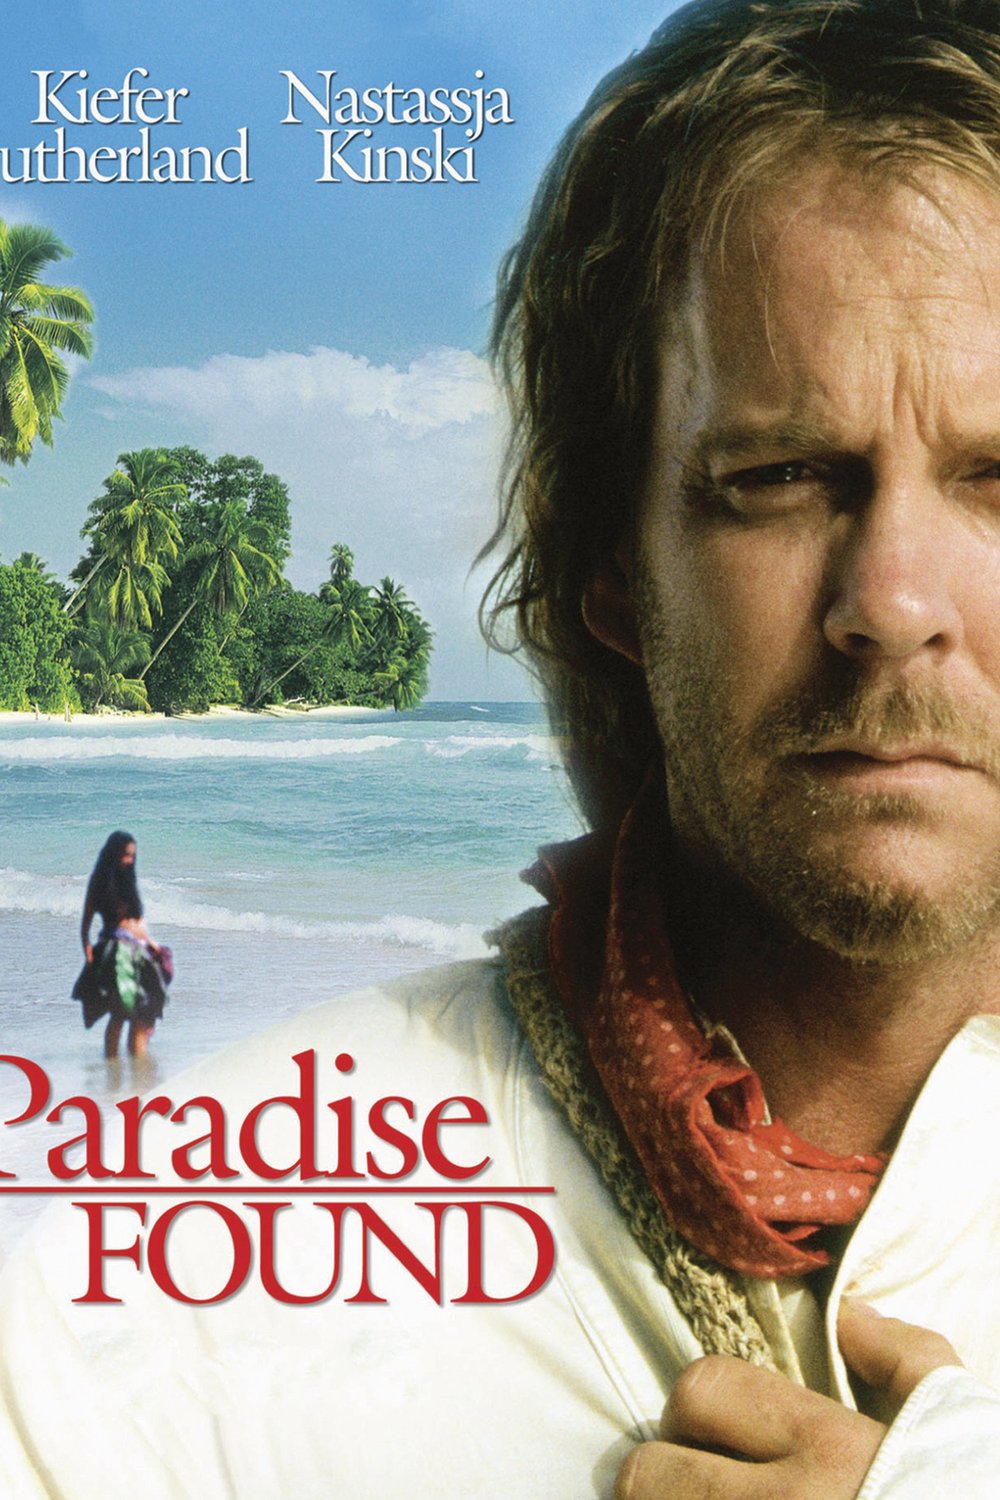 Poster of the movie Paradise Found